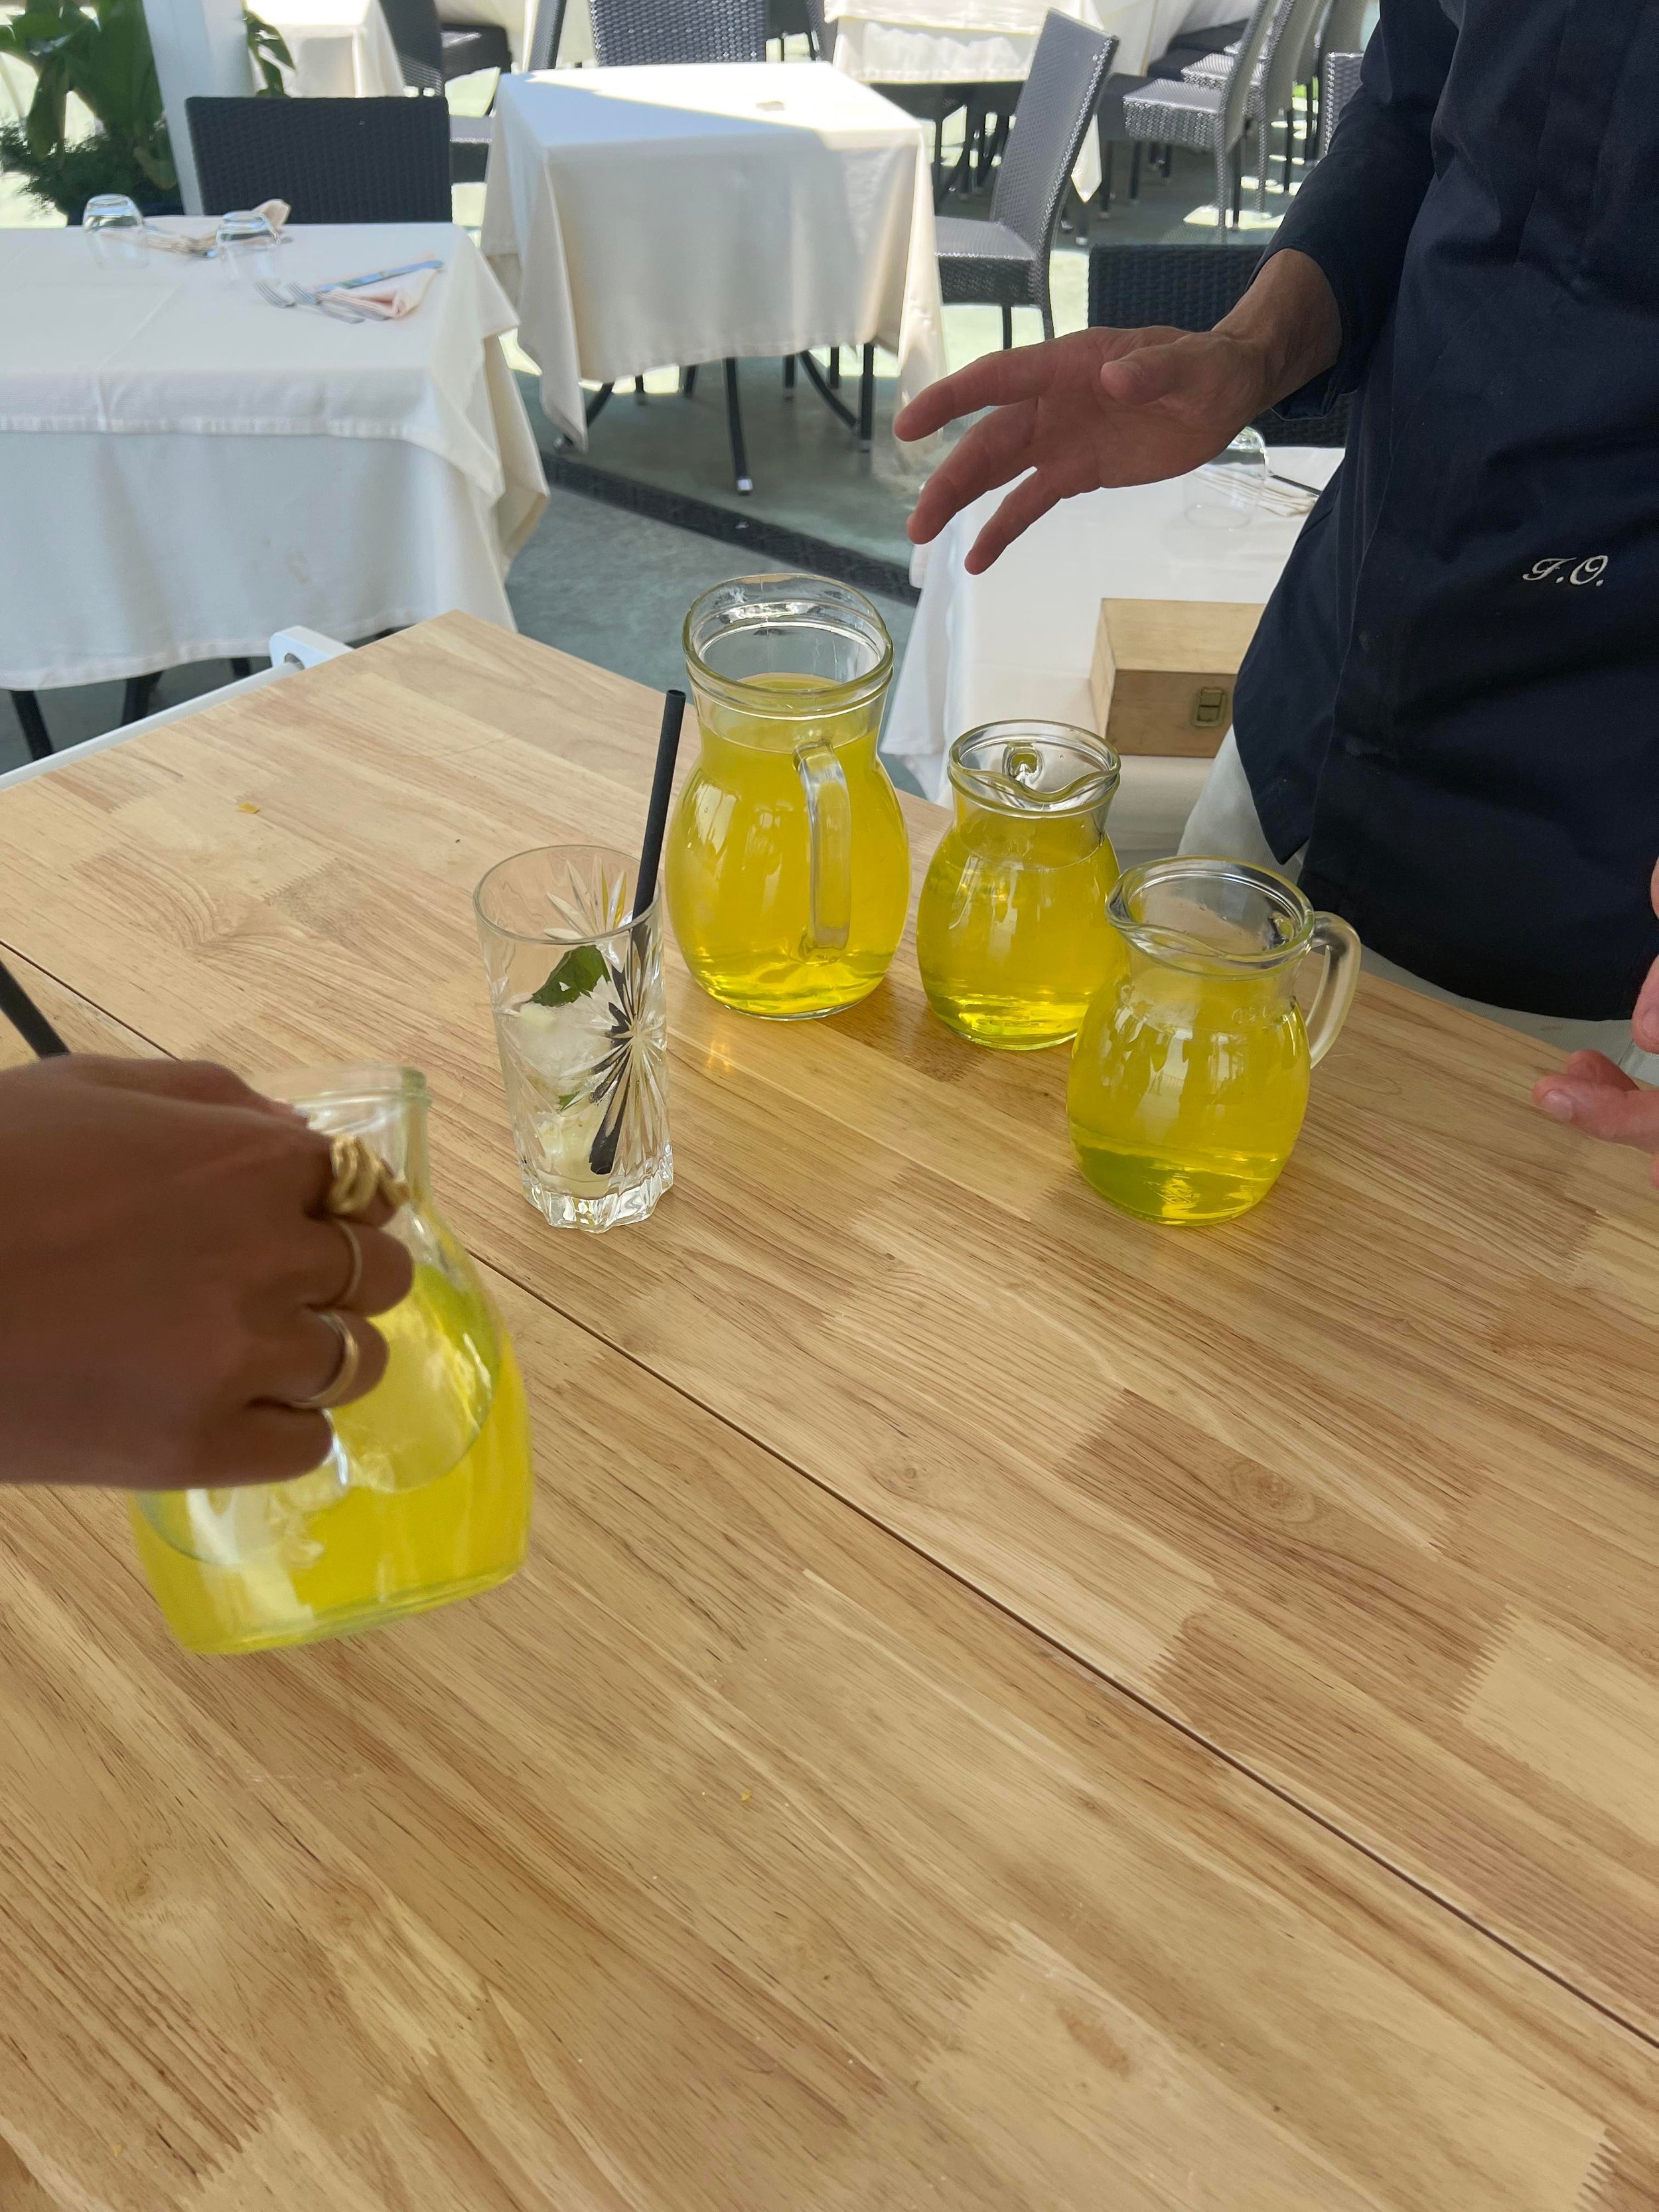 Pour one part of limoncello into the glass (Copy)